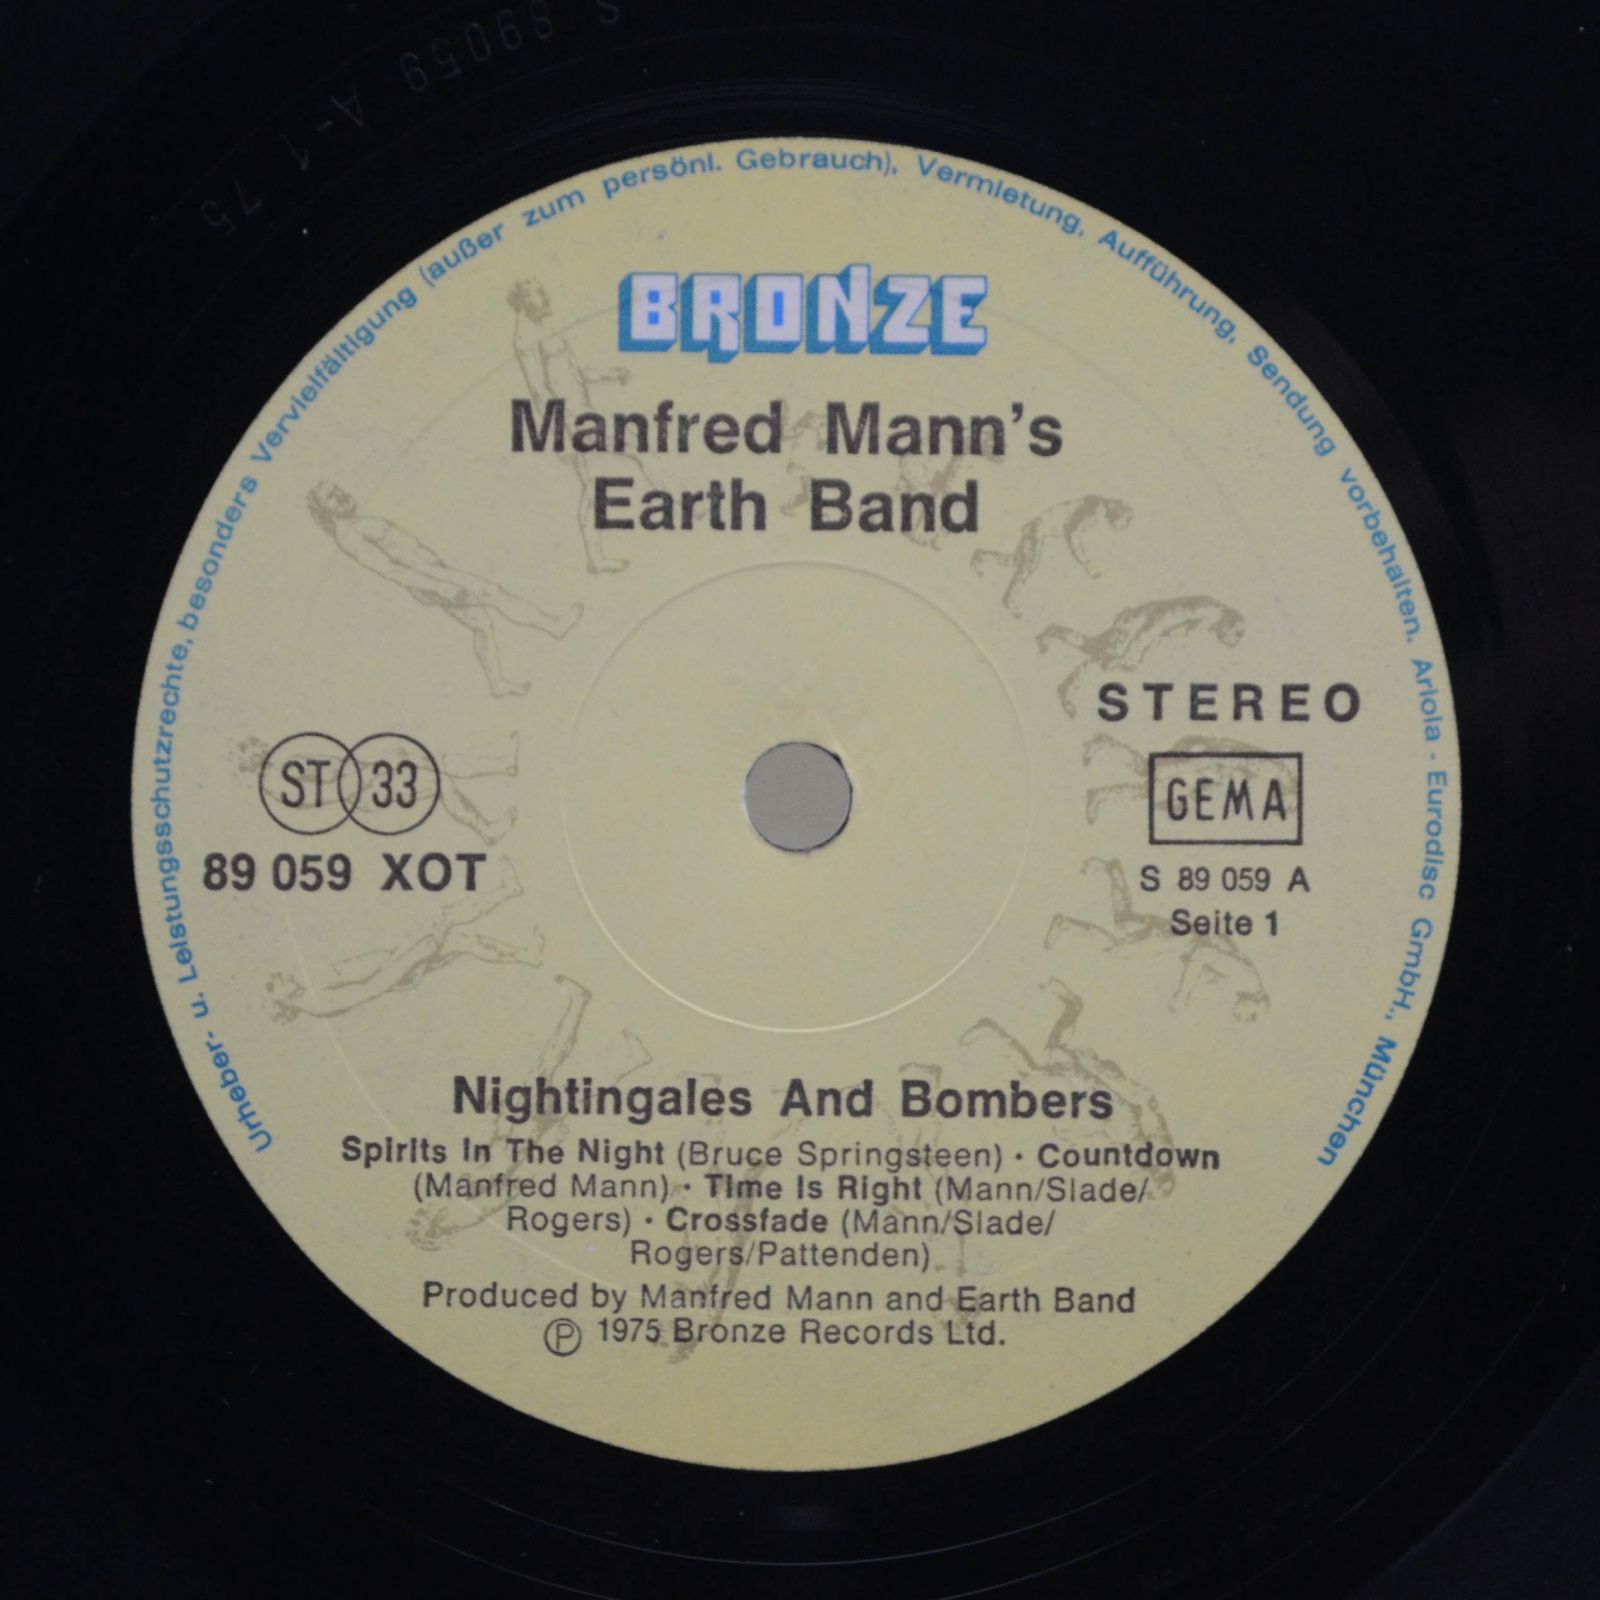 Manfred Mann's Earth Band — Nightingales & Bombers, 1975